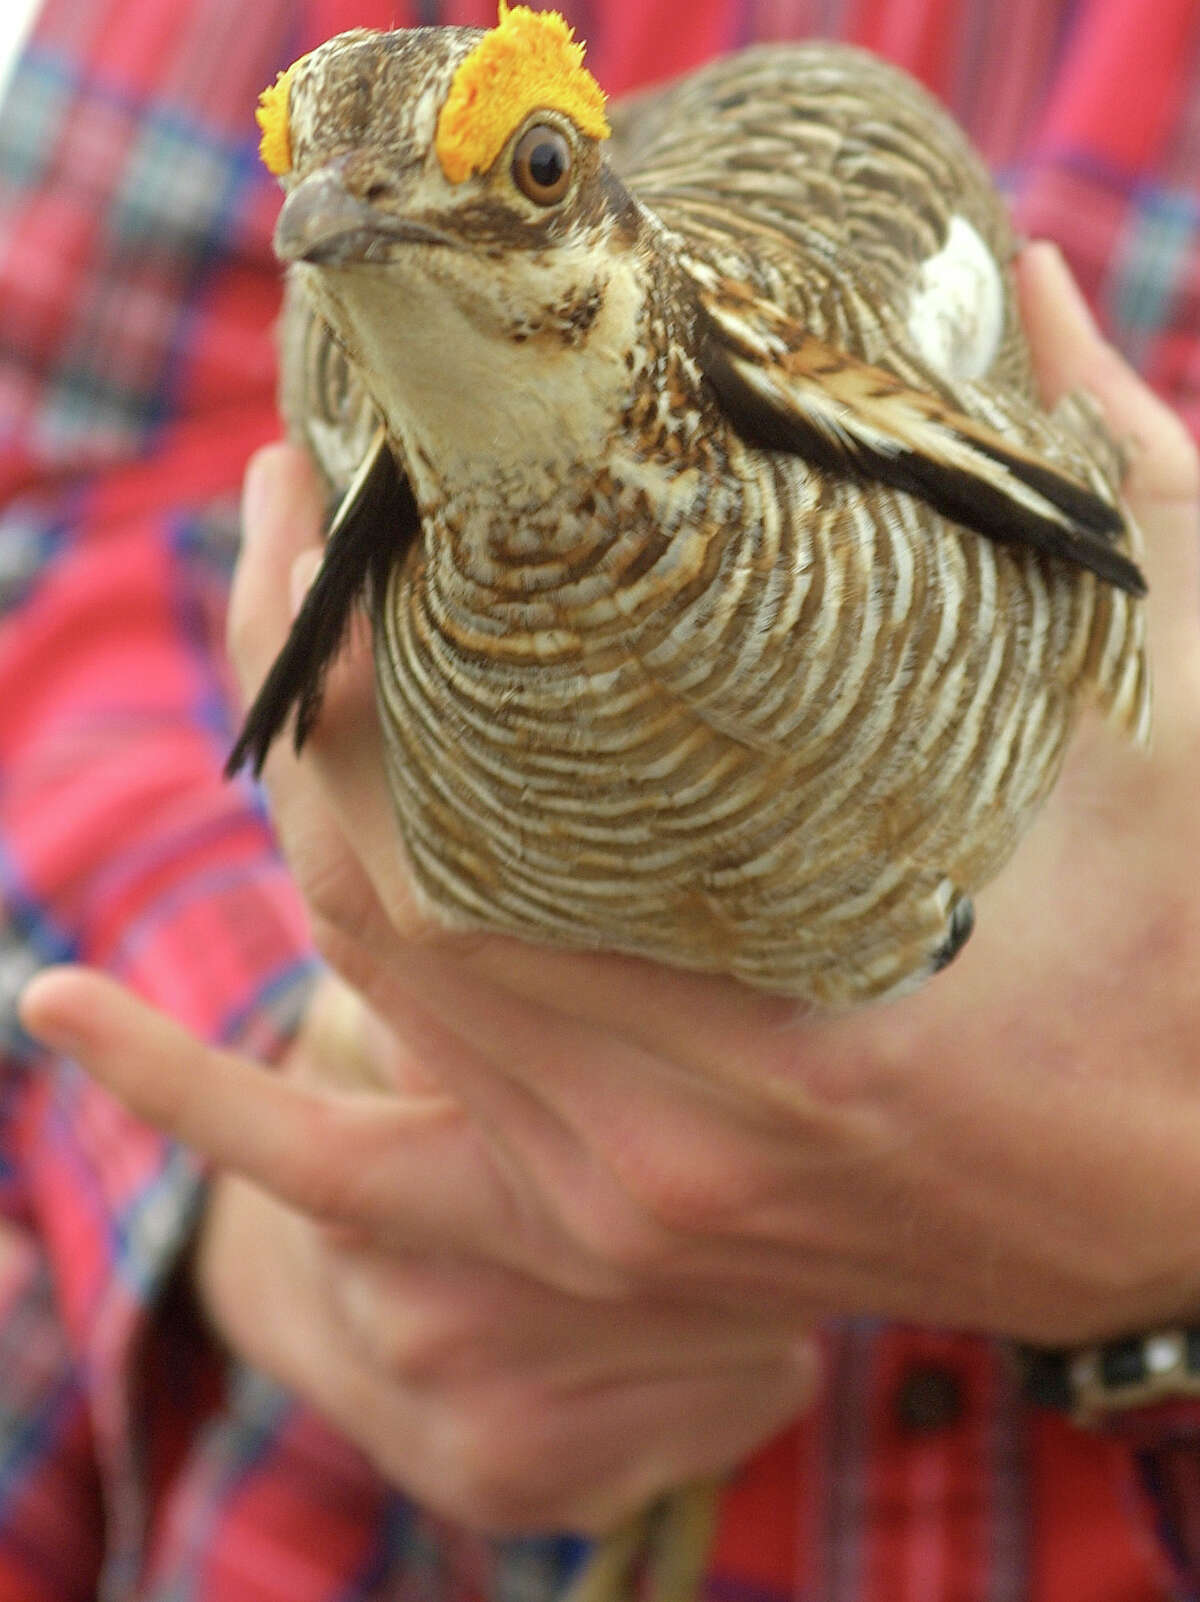 The lesser prairie chicken lives mostly in Kansas, but also in Texas, New Mexico, Oklahoma and Colorado. ﻿ Continue clicking to see more of Texas' endangered species.